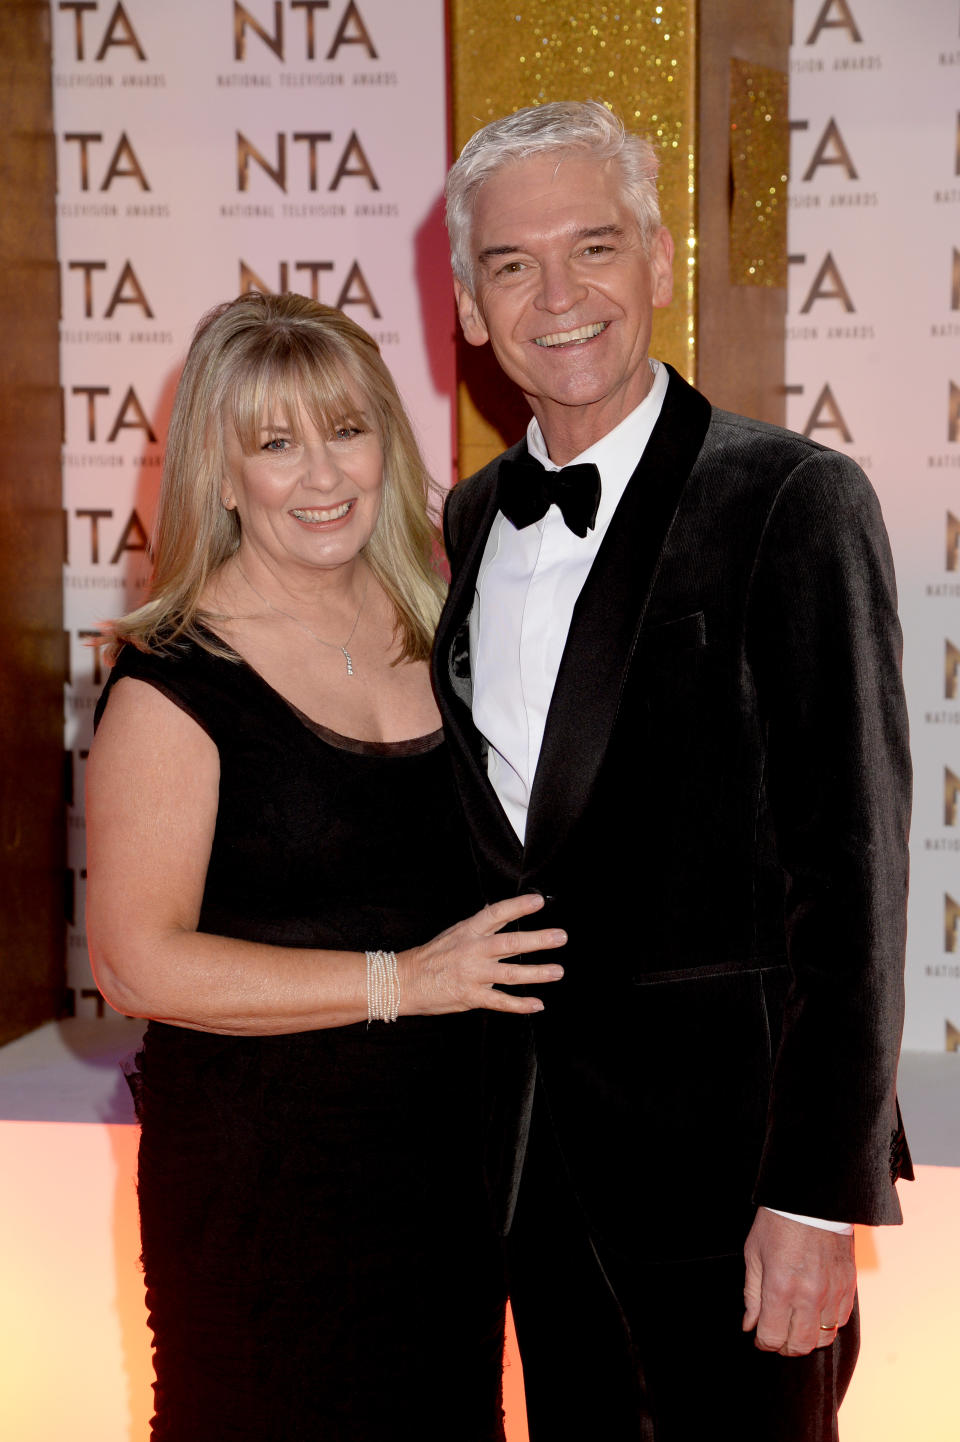 Stephanie Lowe and Phillip Schofield attend the National Television Awards 2020 at The O2 Arena on January 28, 2020 in London, England. (Photo by Dave J Hogan/Getty Images)